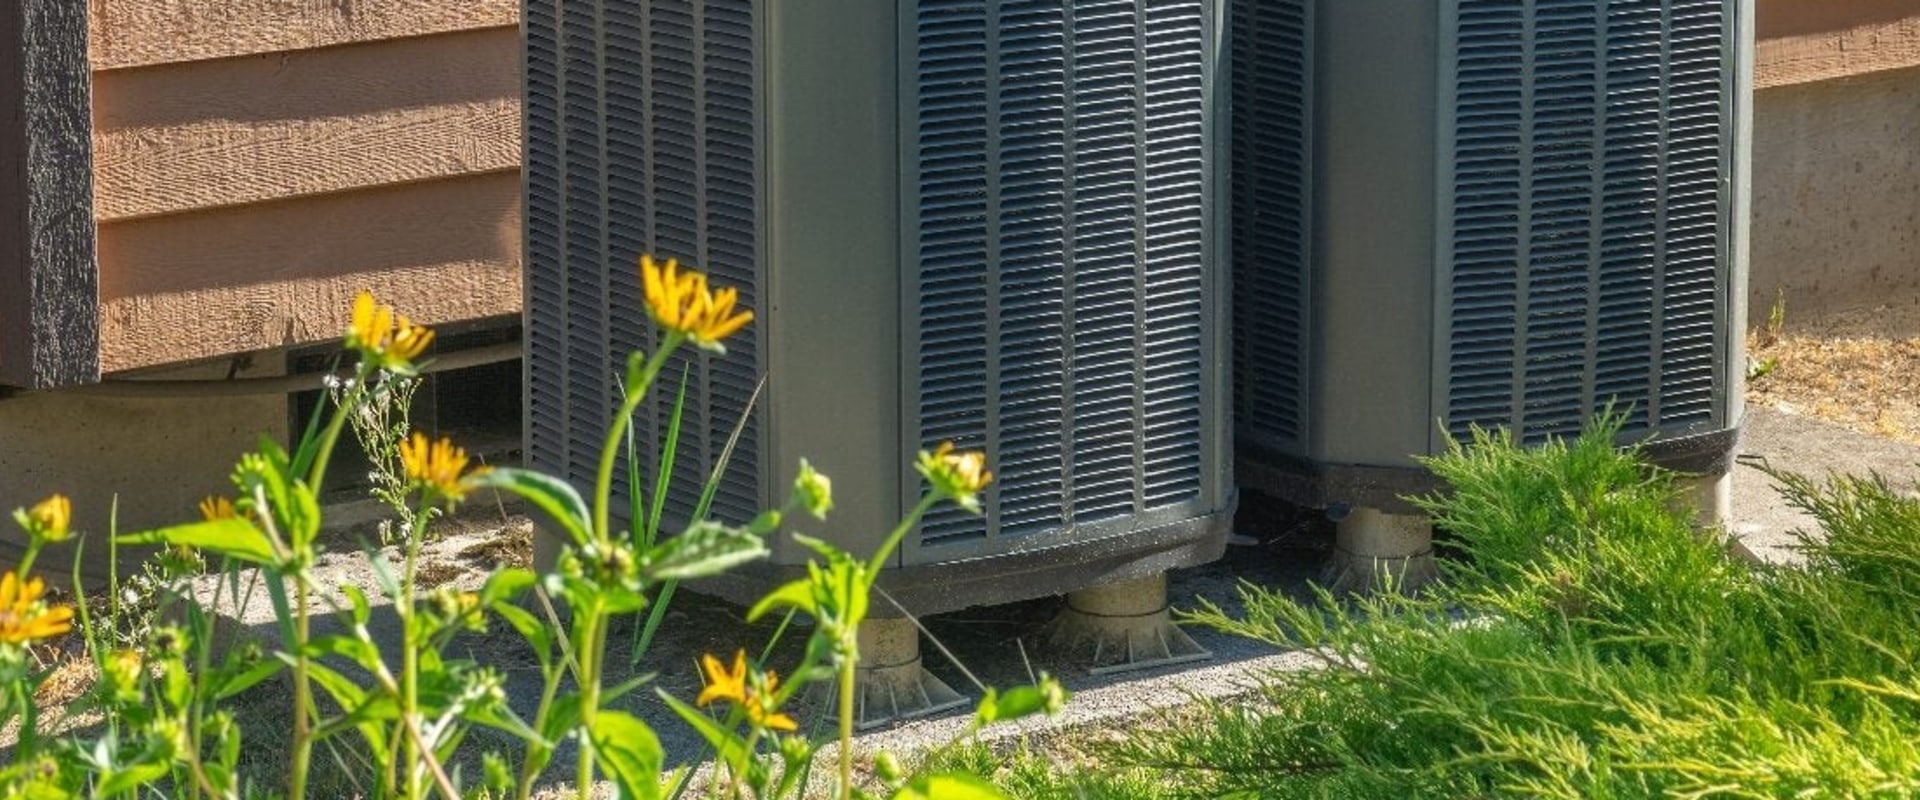 How much does it cost to service the HVAC system?